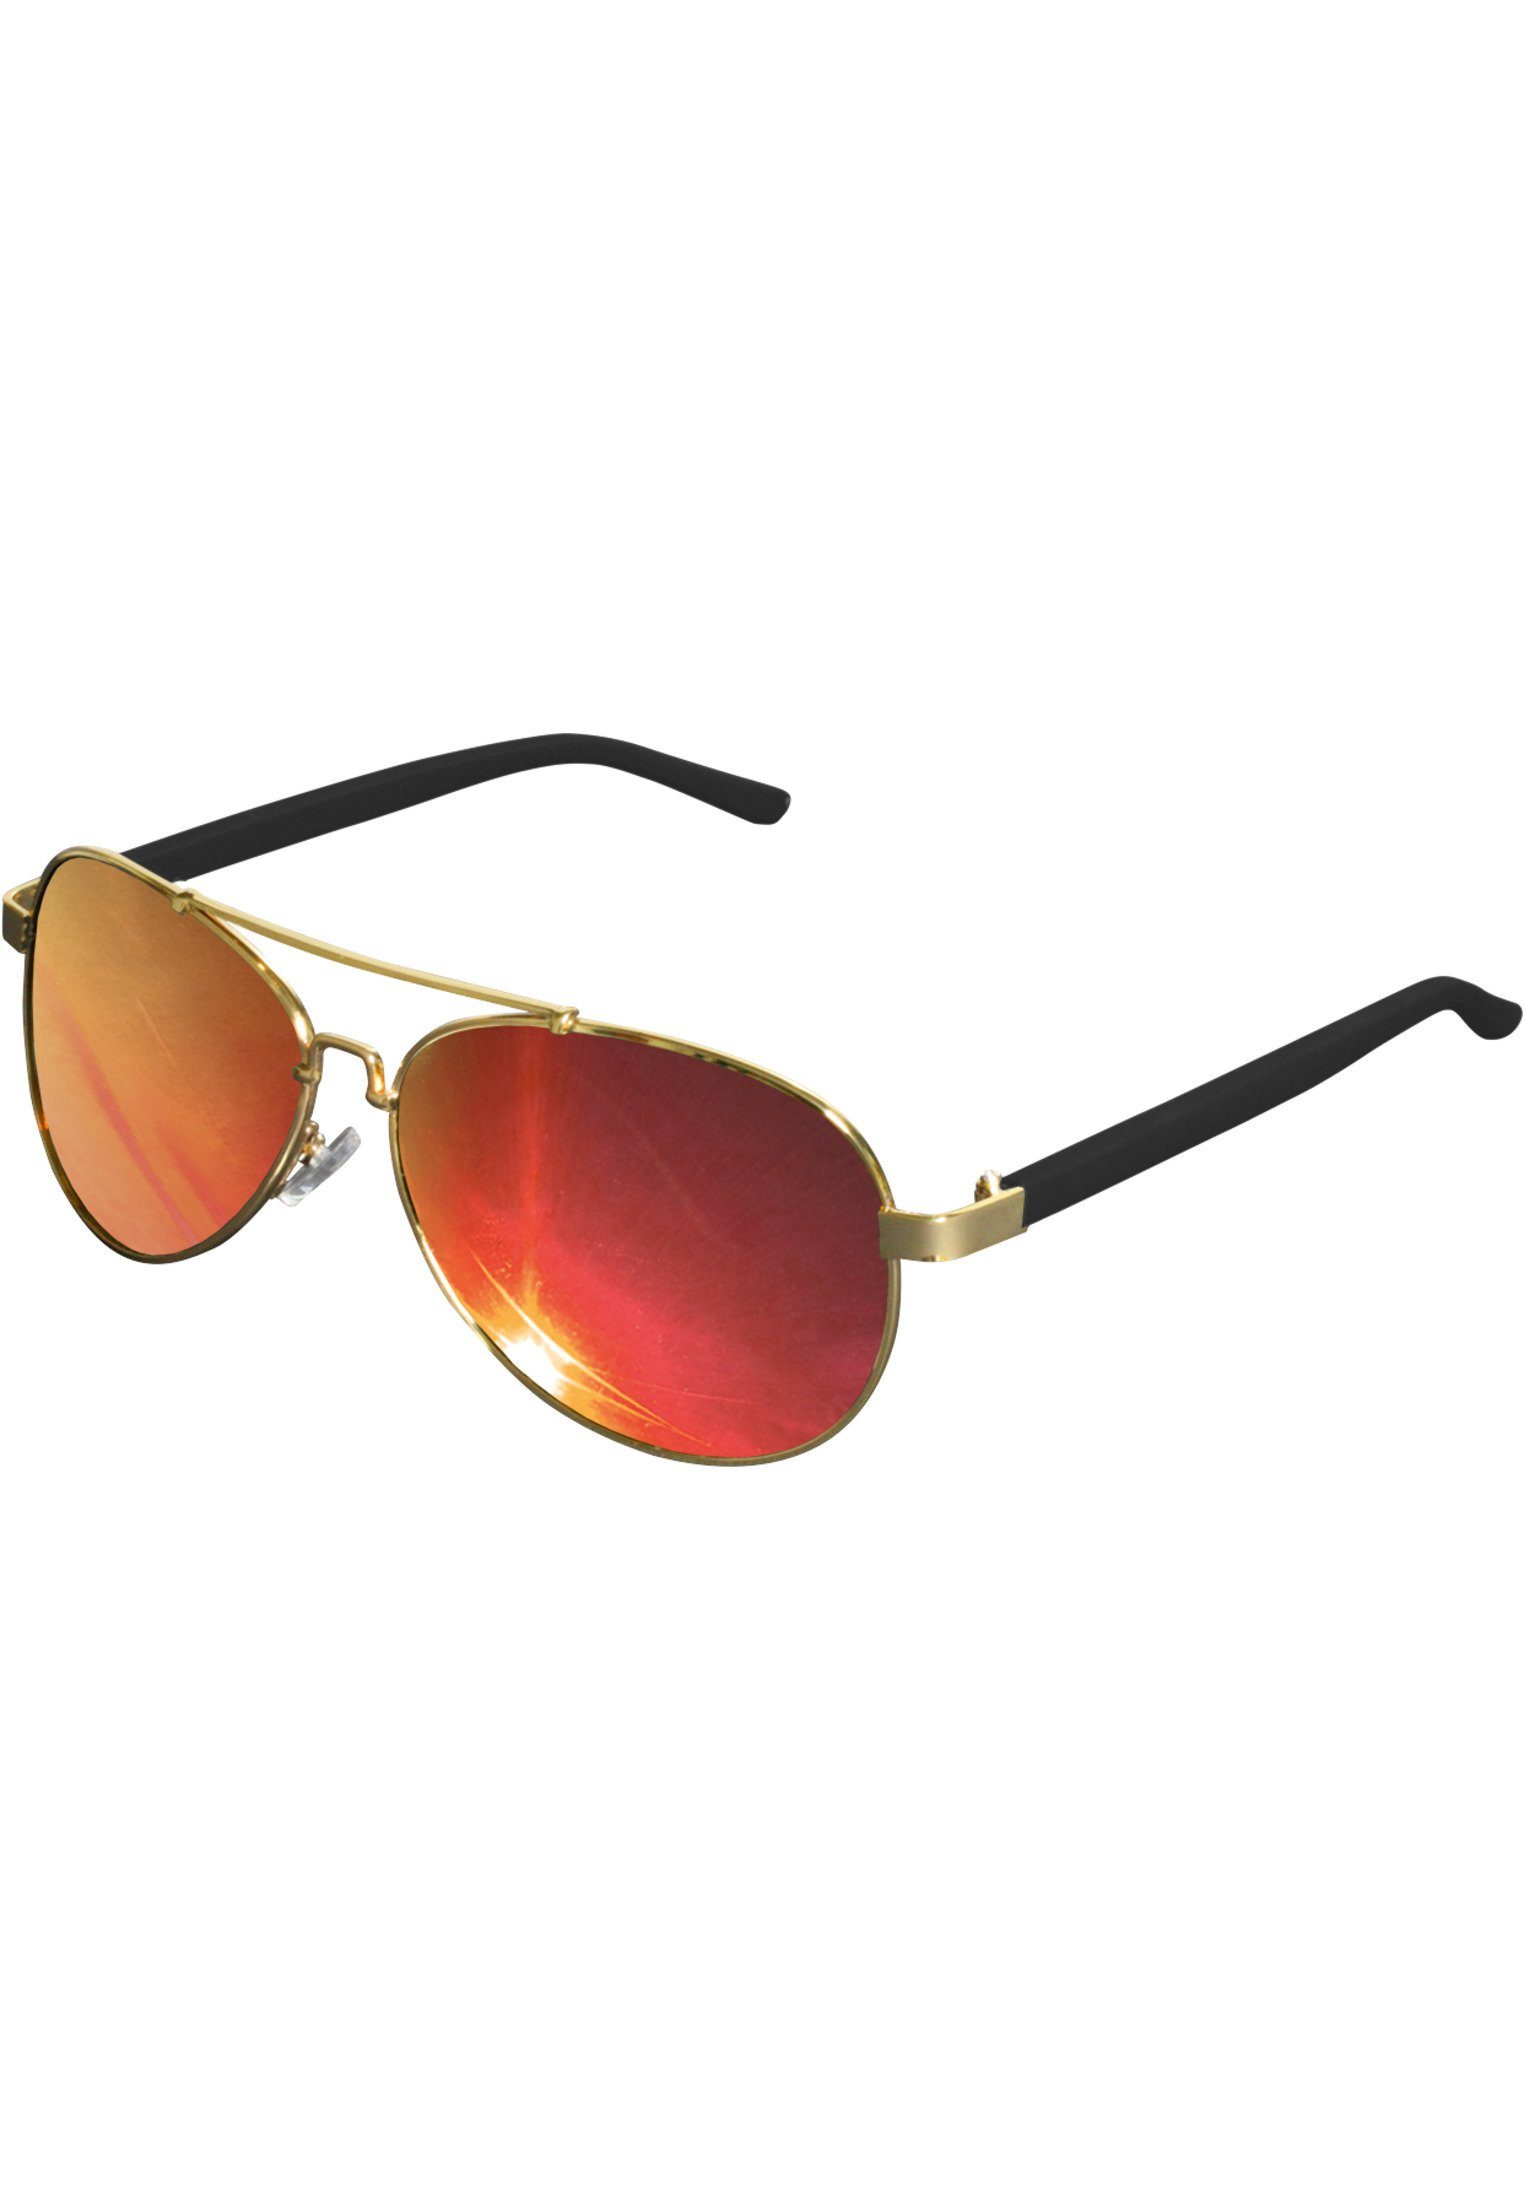 Mumbo Mirror MSTRDS Sonnenbrille Accessoires gold/red Sunglasses